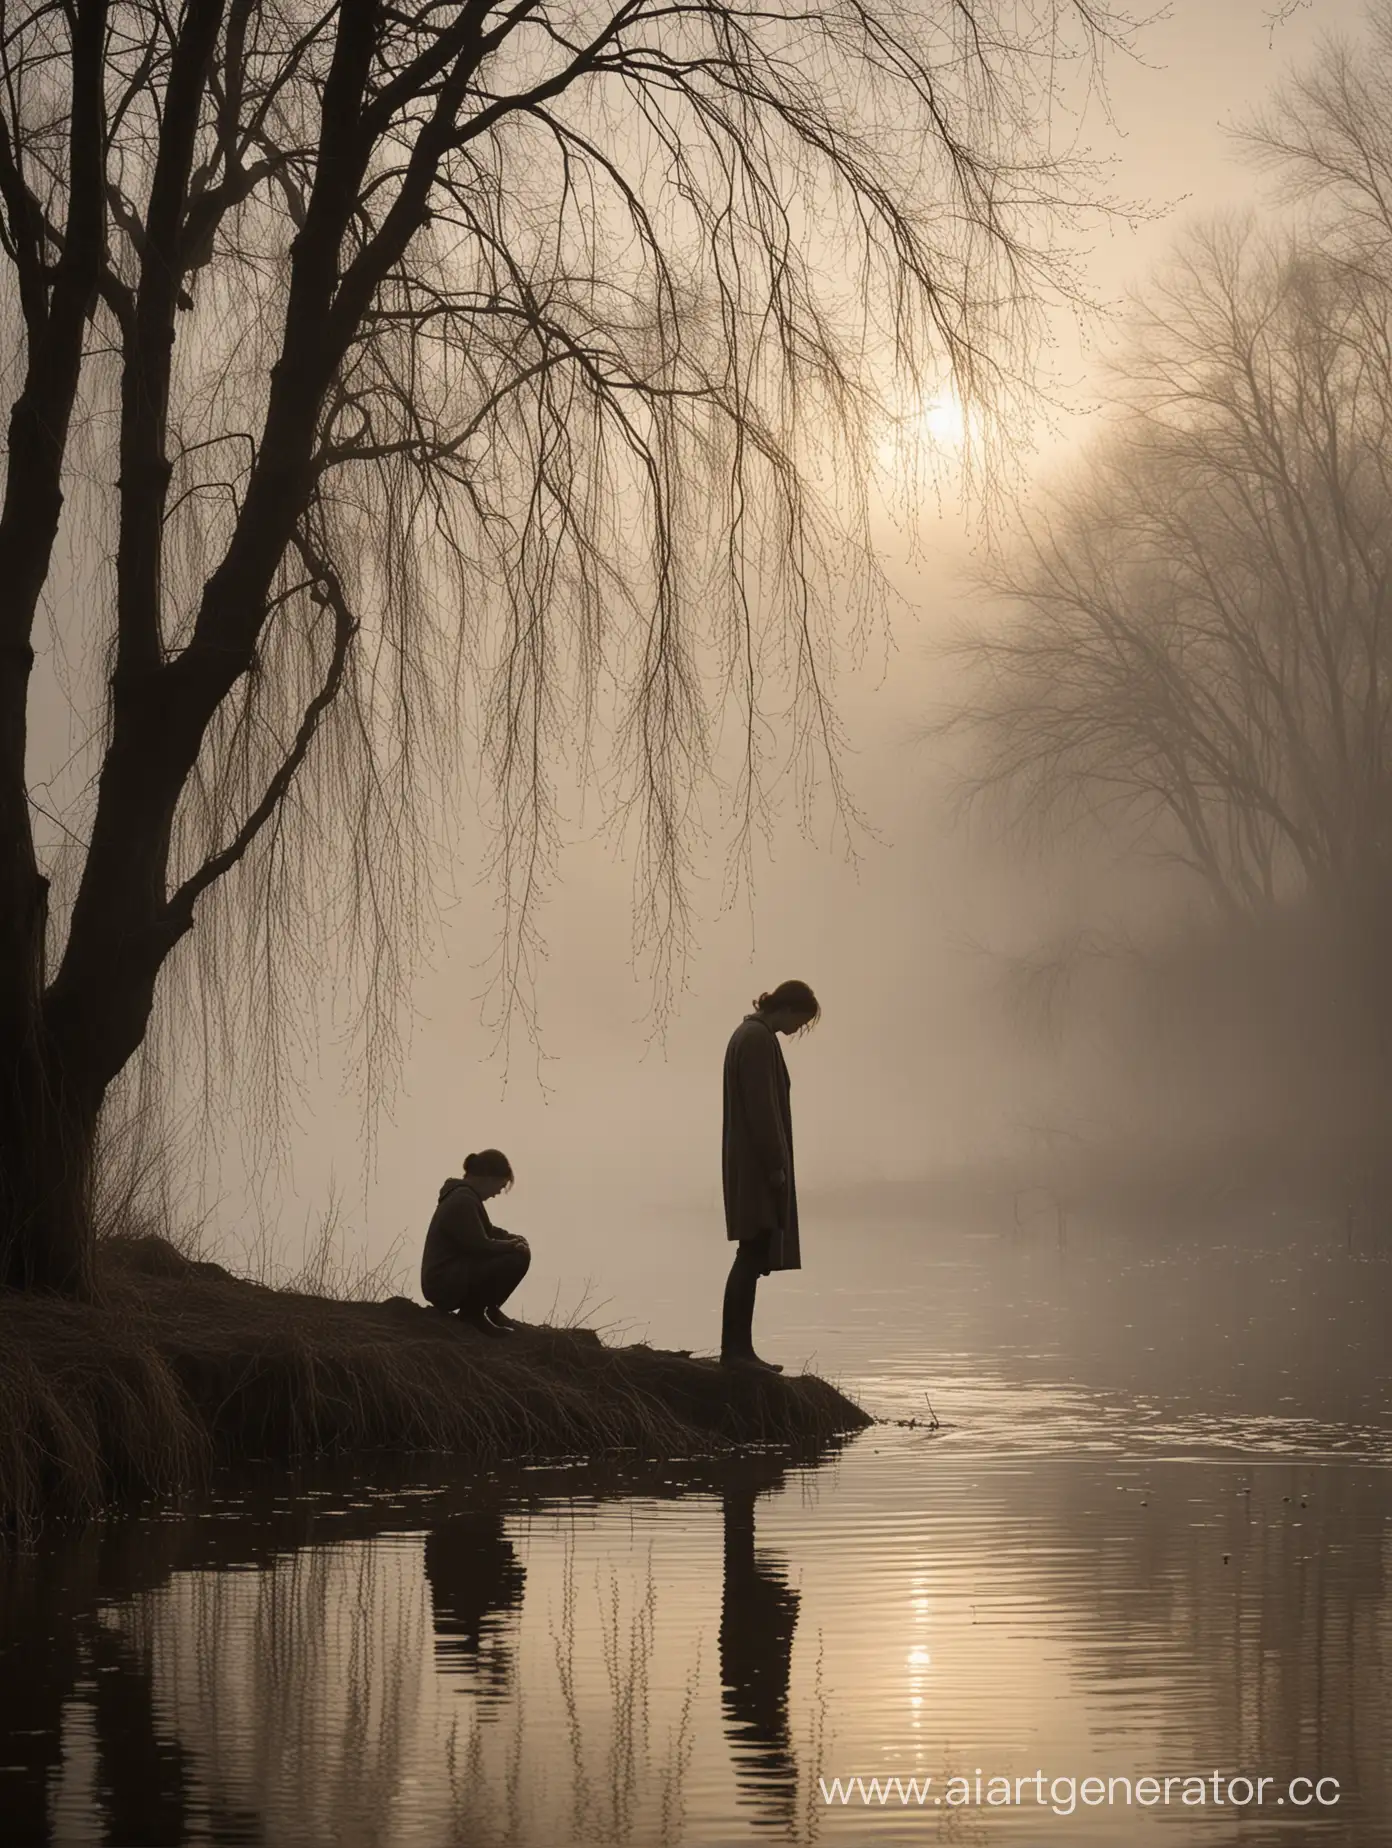 Imagine a solitary figure standing on the edge of a misty riverbank, silhouetted against a dusky evening sky. The river flows gently, reflecting the fading sunlight. The figure's posture conveys a sense of resignation or heartache, perhaps with shoulders slumped or head bowed. Nearby, we see a weeping willow tree, its branches hanging low, mirroring the emotional weight of the scene. In the distance, a bridge spans the river, hinting at the journey of emotional transition or separation. The atmosphere is melancholic, yet there's a quiet strength in the figure's resolve. This image captures the poignant mood of "Cry Me a River," evoking feelings of longing, loss, and eventual healing.